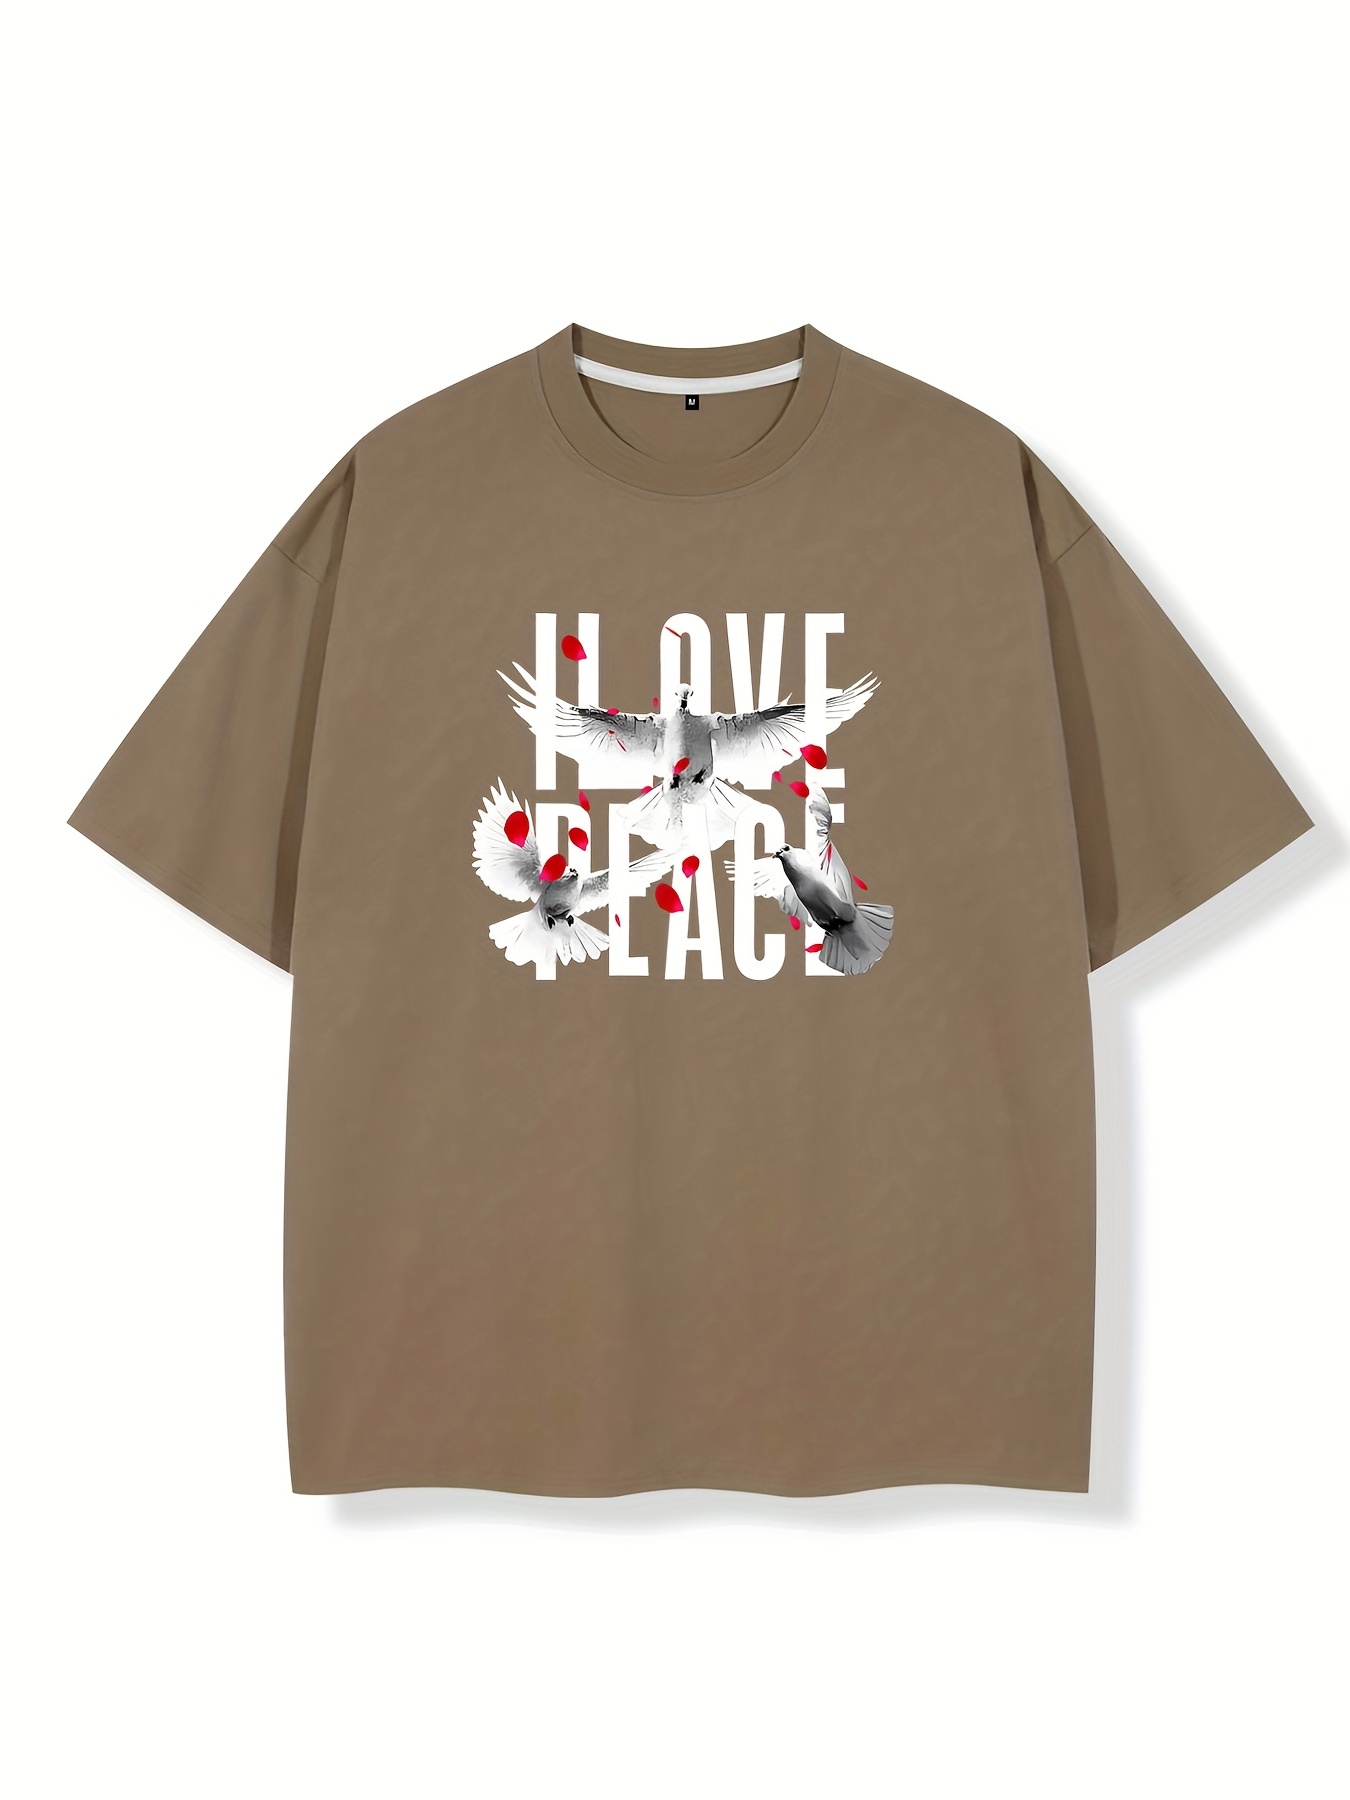 Louis Vuitton Peace and Love Tee  T shirts for women, Mens tops